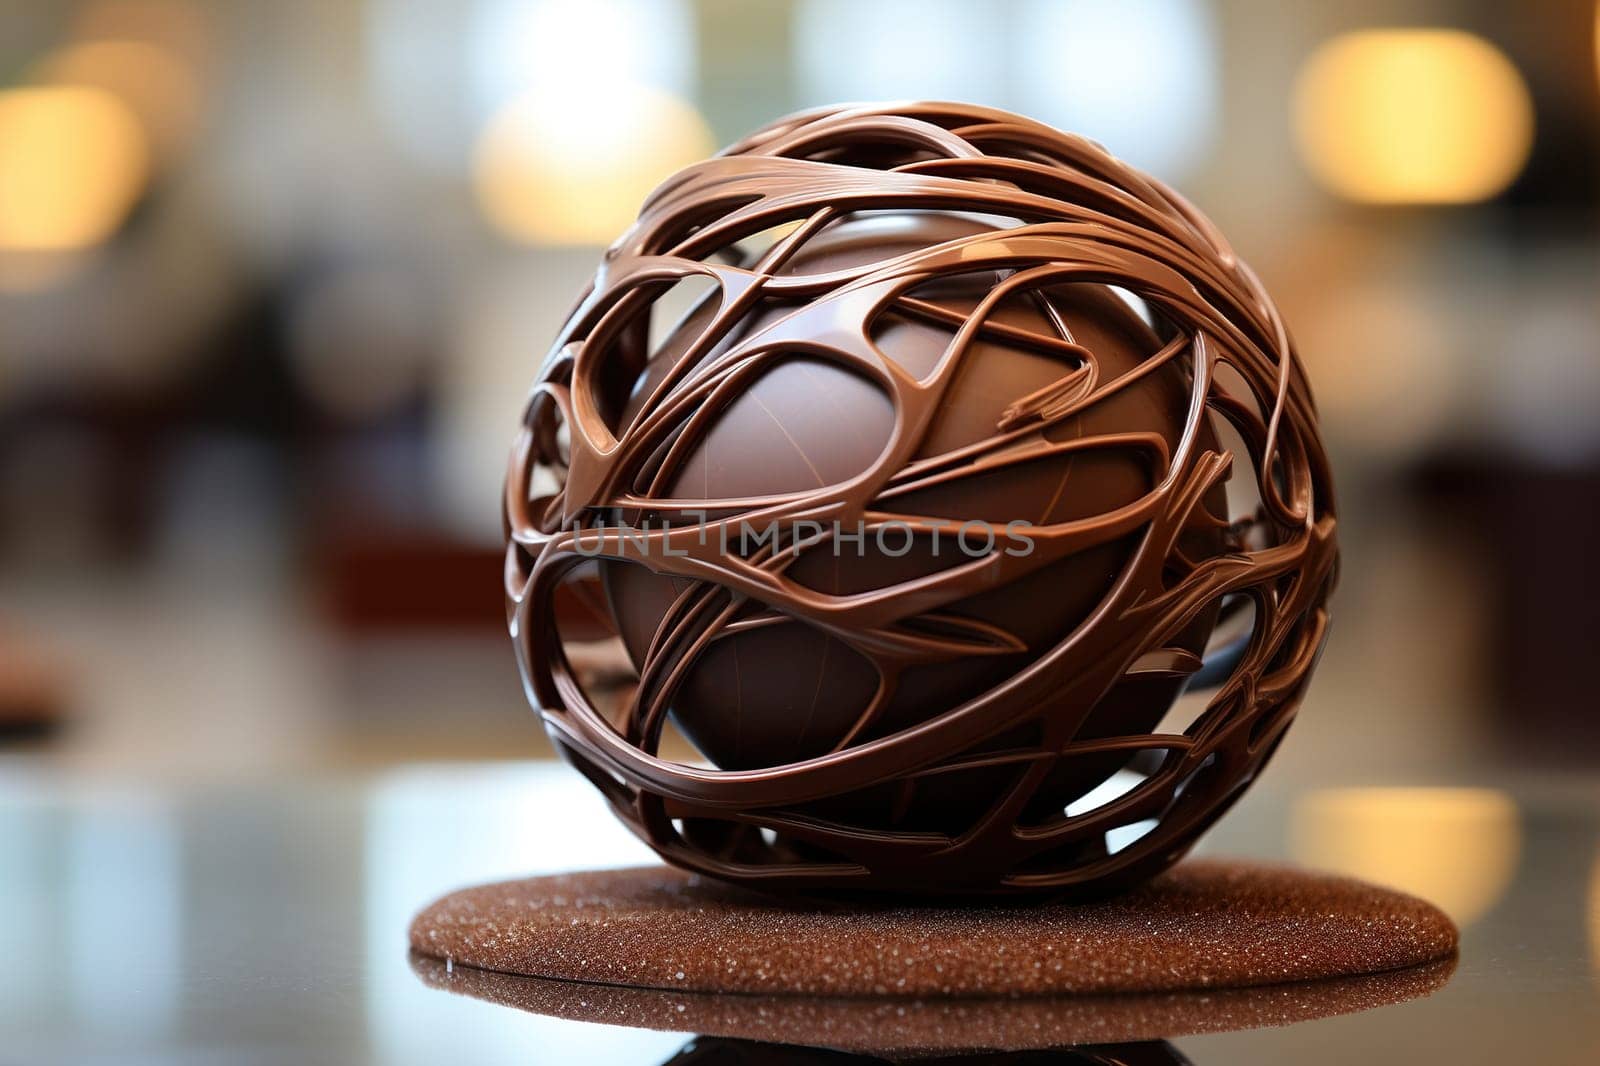 Chocolate dessert in the form of a sphere on a wooden tabletop with a golden bokeh background.